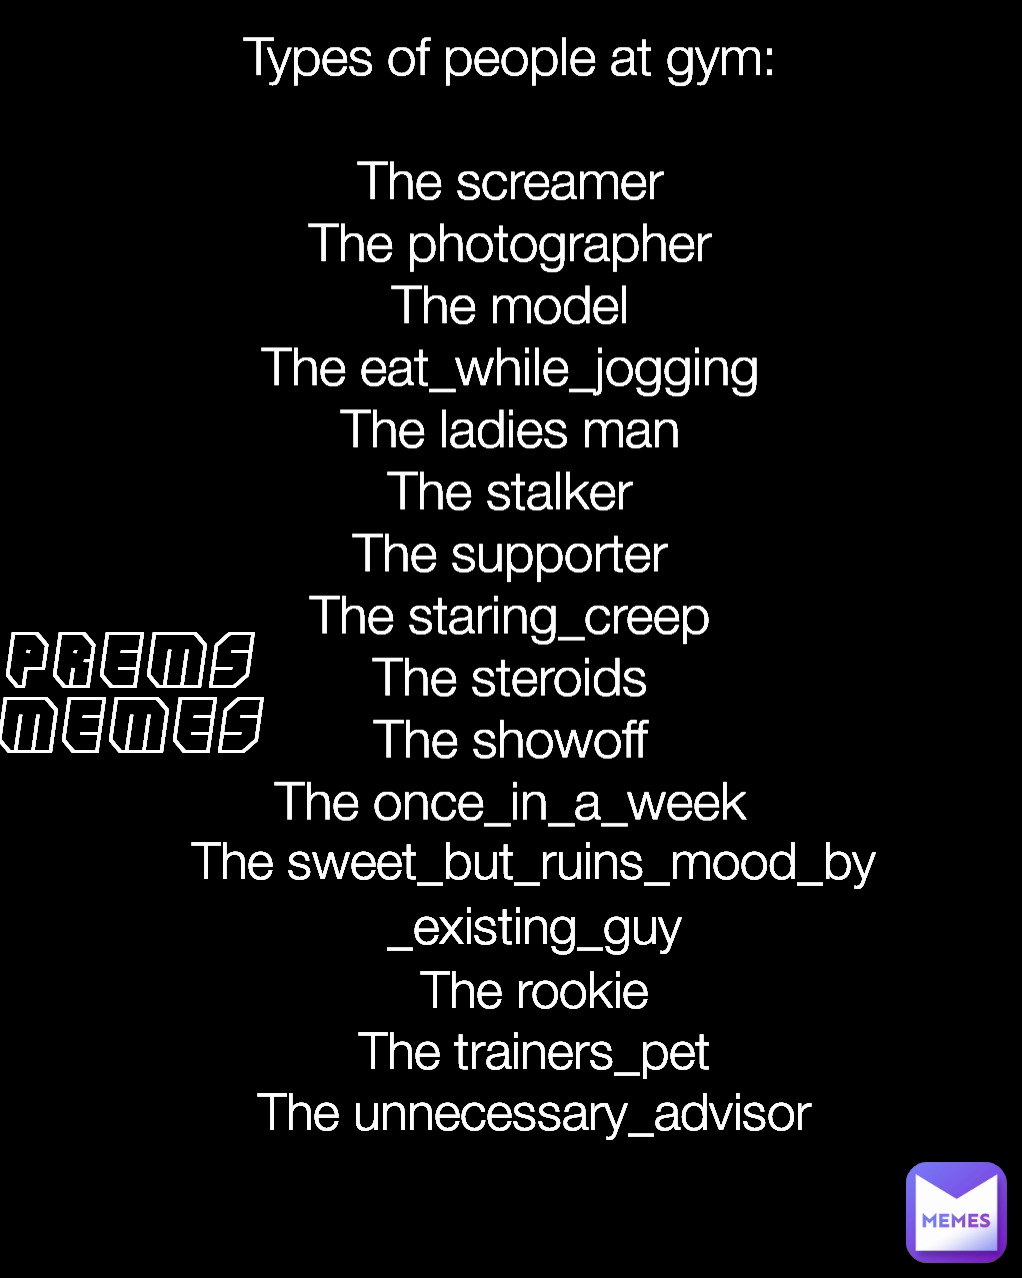 The sweet_but_ruins_mood_by_existing_guy
The rookie
The trainers_pet
The unnecessary_advisor
 PREMS
MEMES Types of people at gym:

The screamer
The photographer
The model
The eat_while_jogging
The ladies man
The stalker
The supporter
The staring_creep
The steroids
The showoff
The once_in_a_week

